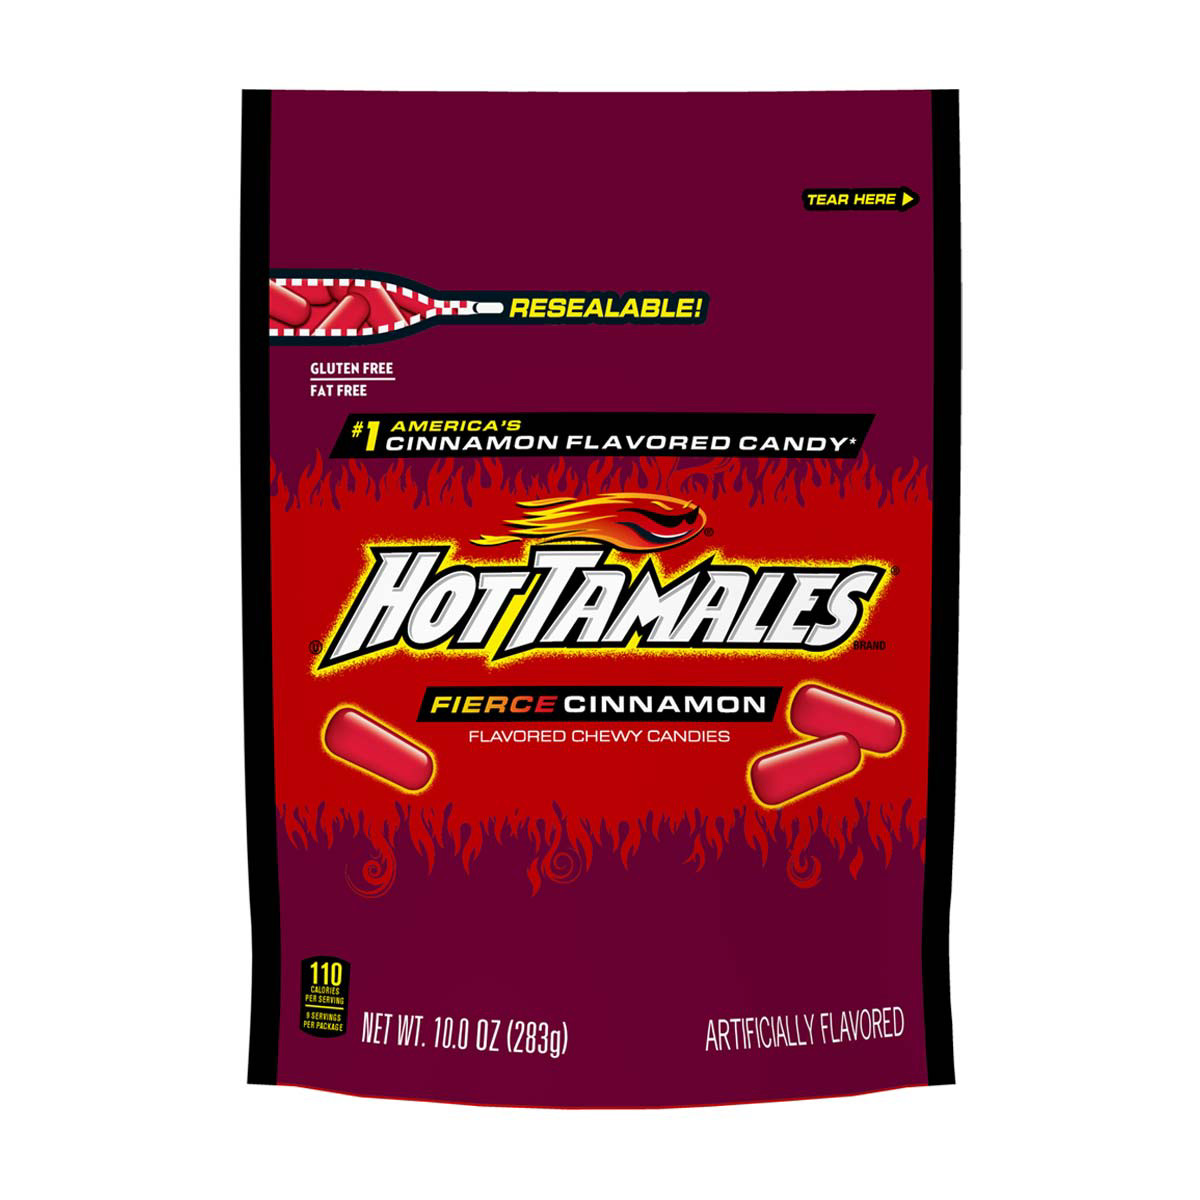 Hot Tamales Fierce Cinnamon Flavored Chewy Candy, 10 oz